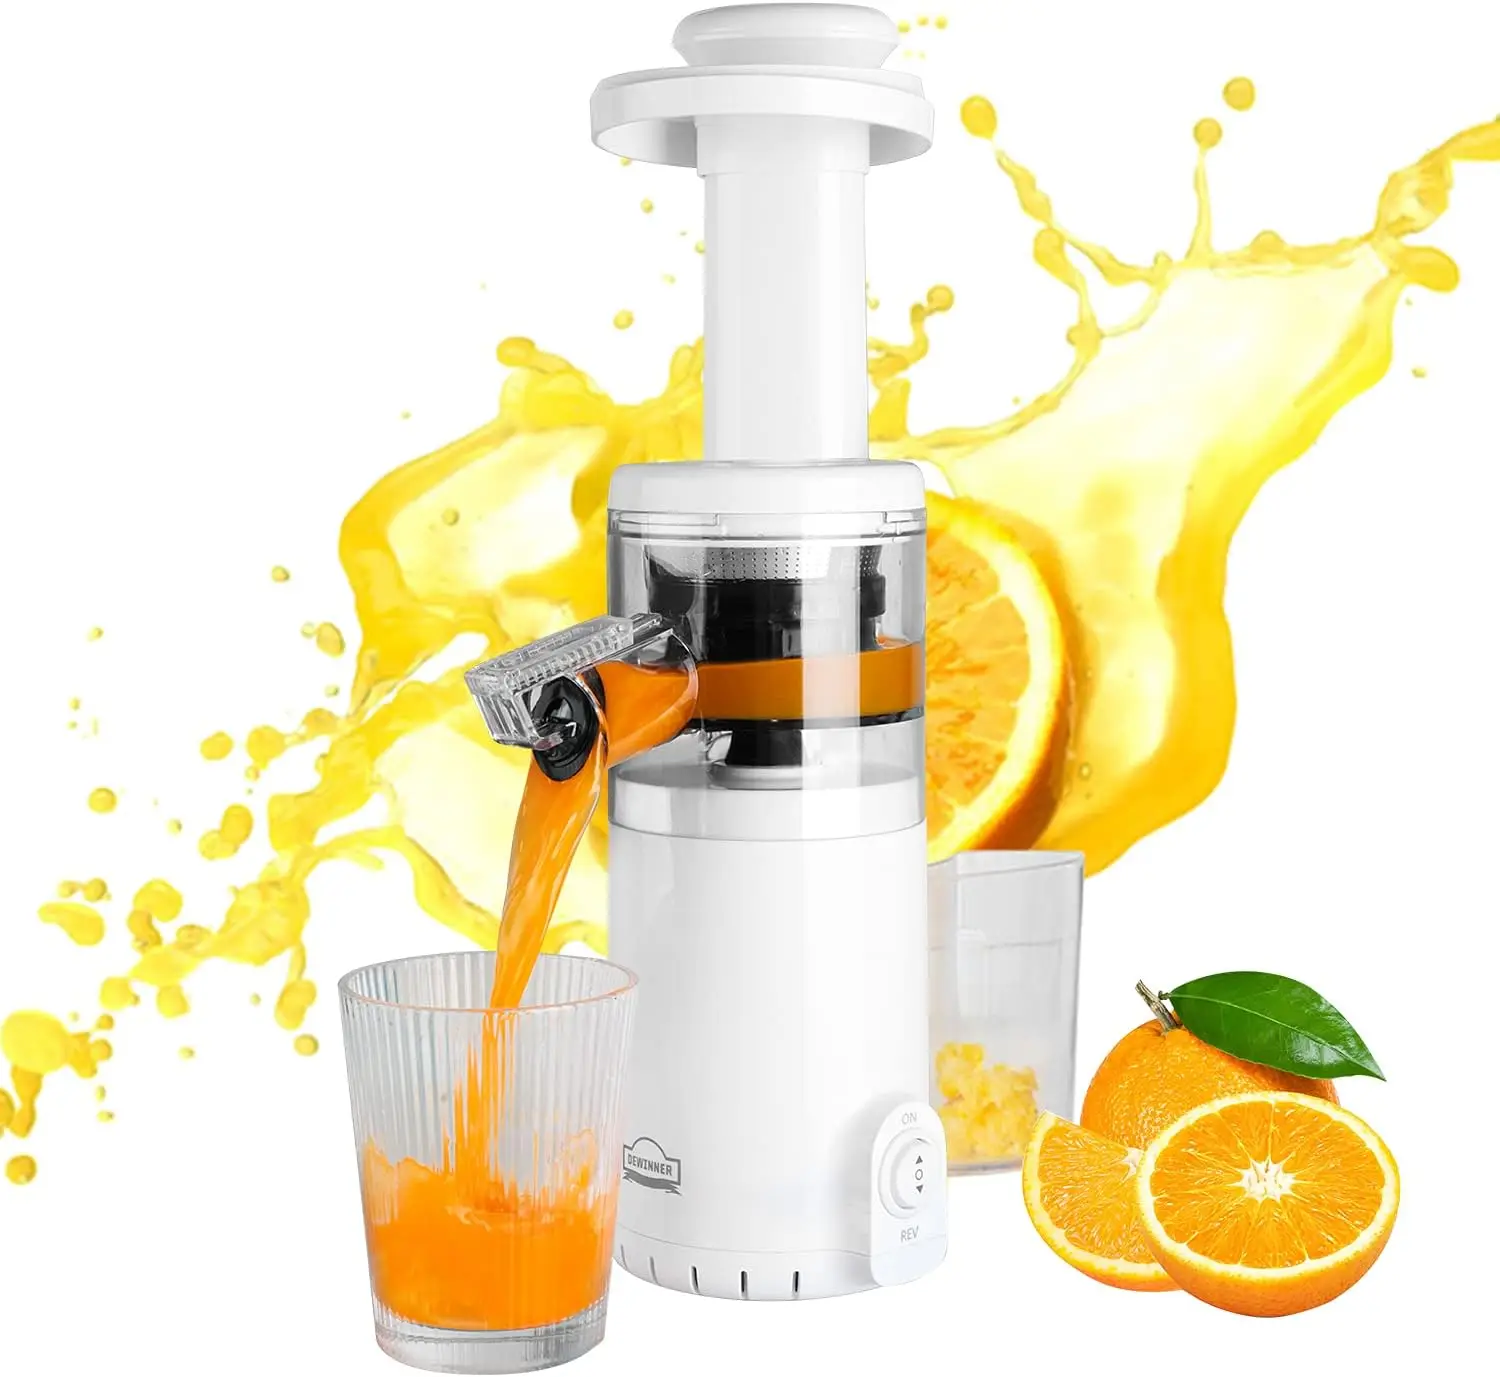 

Masticating Mini Juicer Extractor Easy to Clean, Cold Press Juicer Machine with quiet motor for High Nutrient Fruit & Vegeta Ble